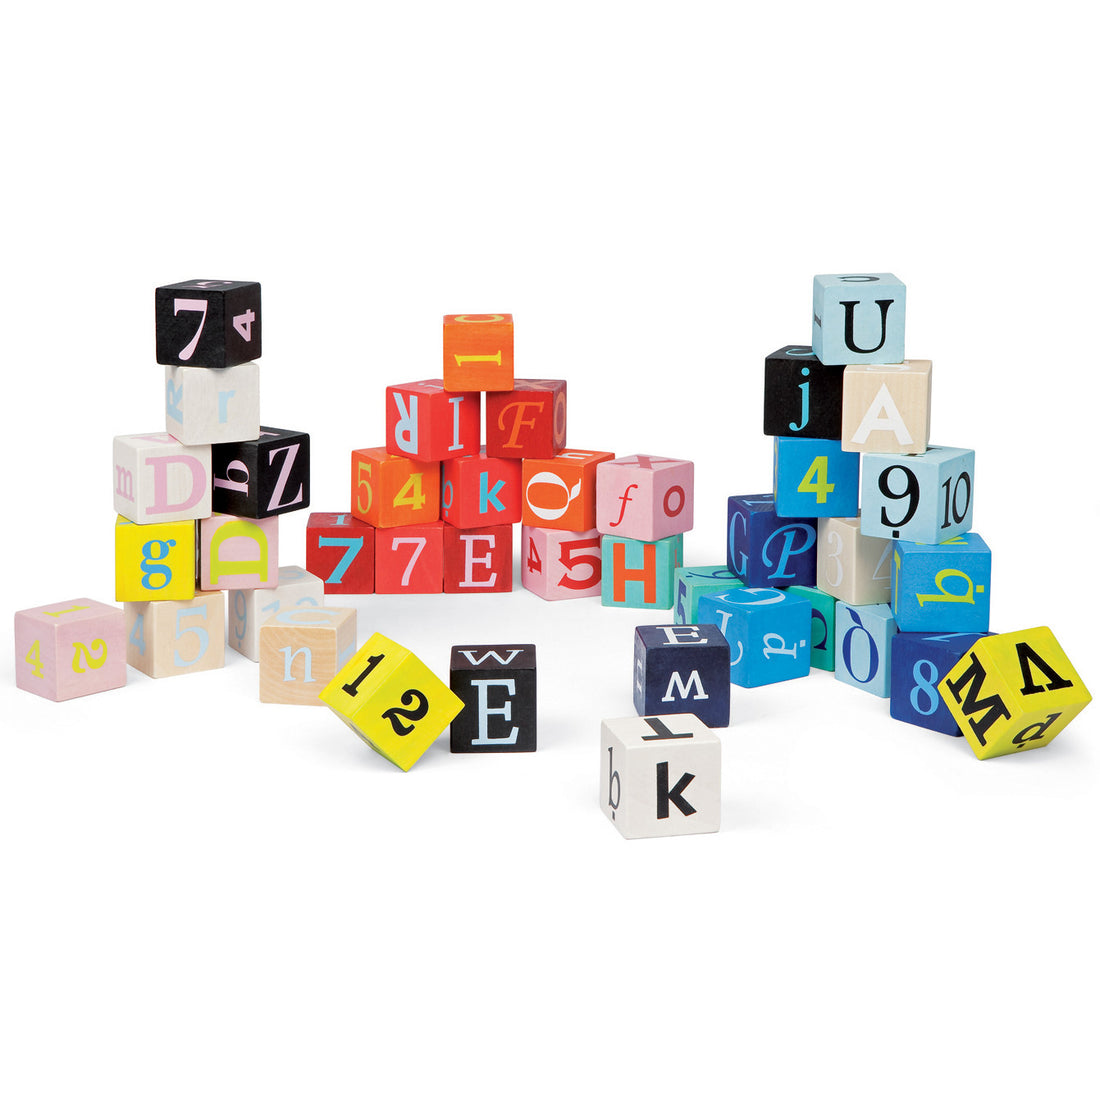 janod-kubix-40-letters-and-numbers-block-02